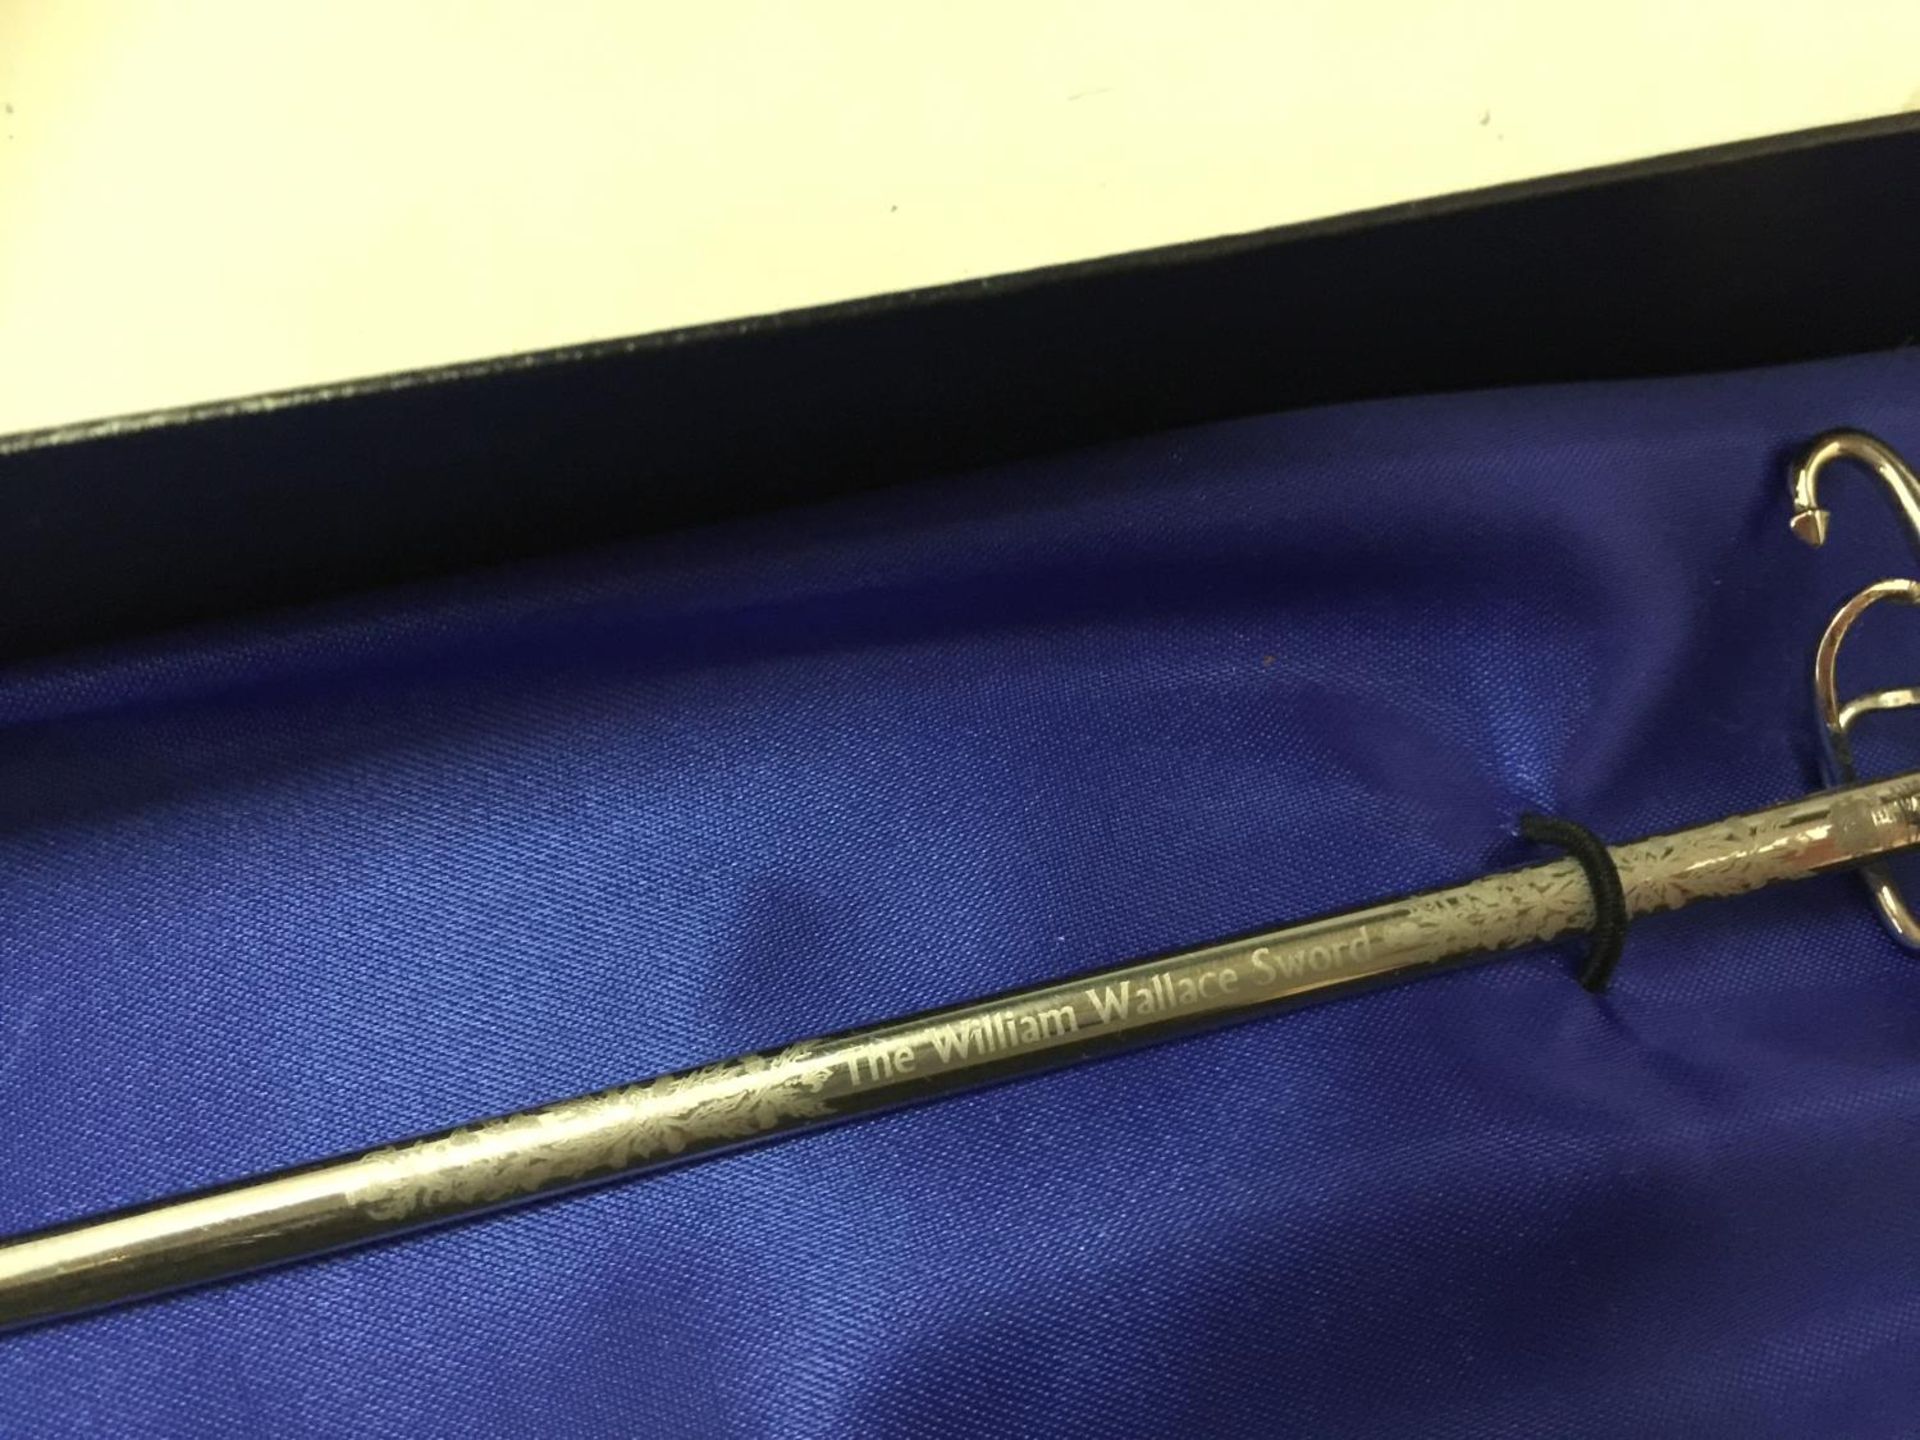 A BOXED REPLICA OF THE SIR WILLIAM WALLACE SWORD BY WILKINSON SWORD - Image 3 of 3